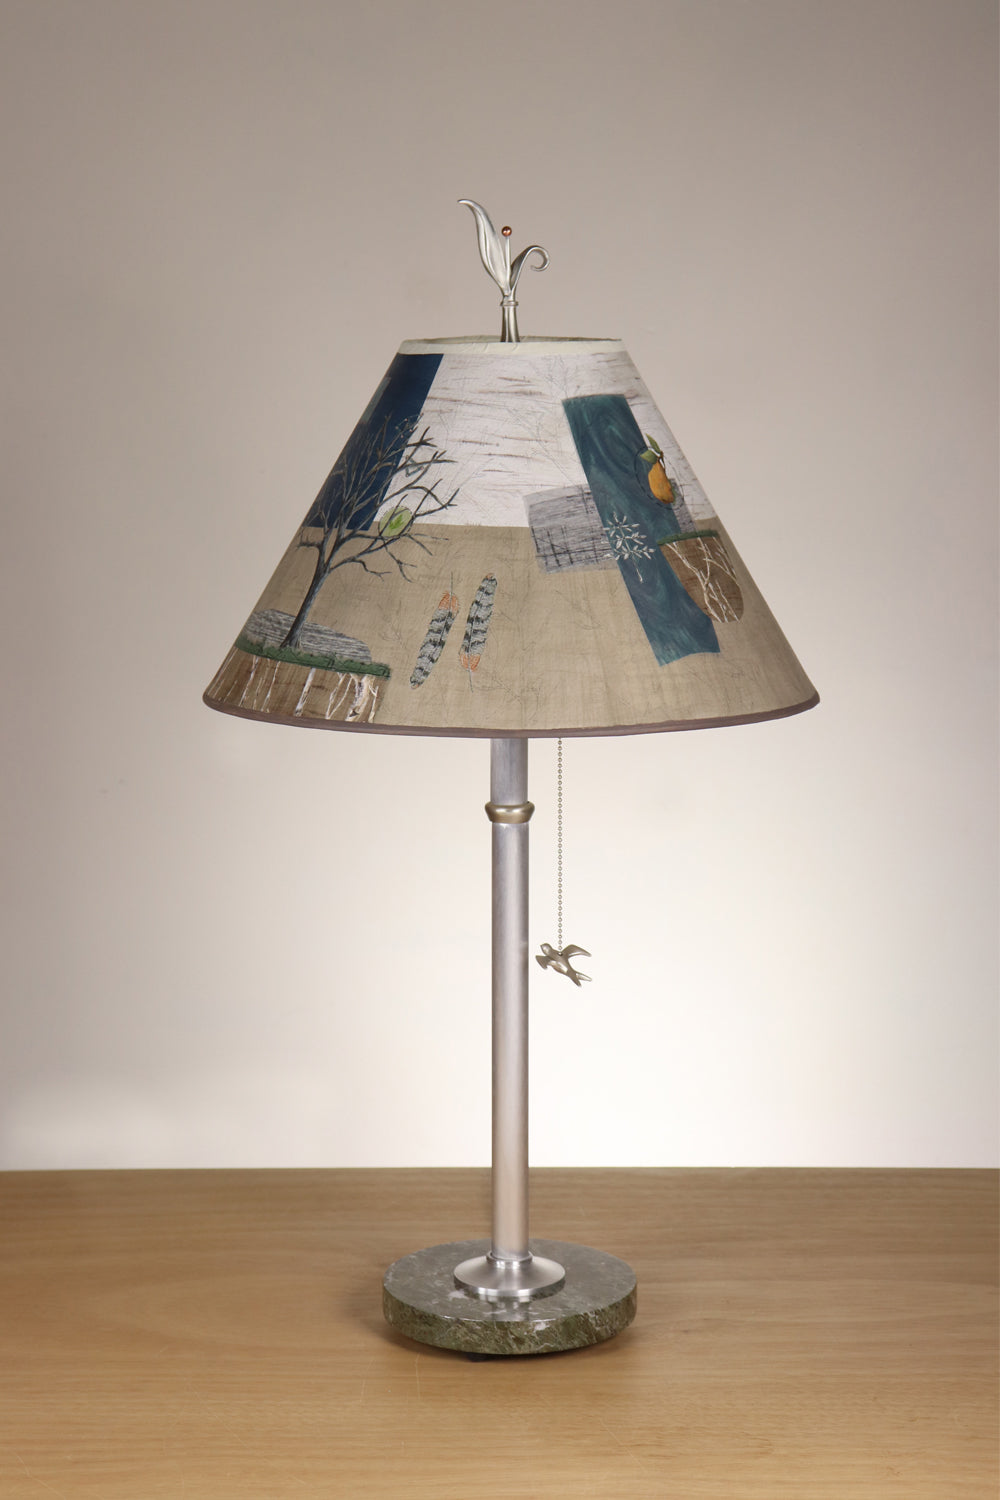 Janna Ugone & Co Table Lamp Aluminum Table Lamp with Medium Conical Shade in Wander in Drift